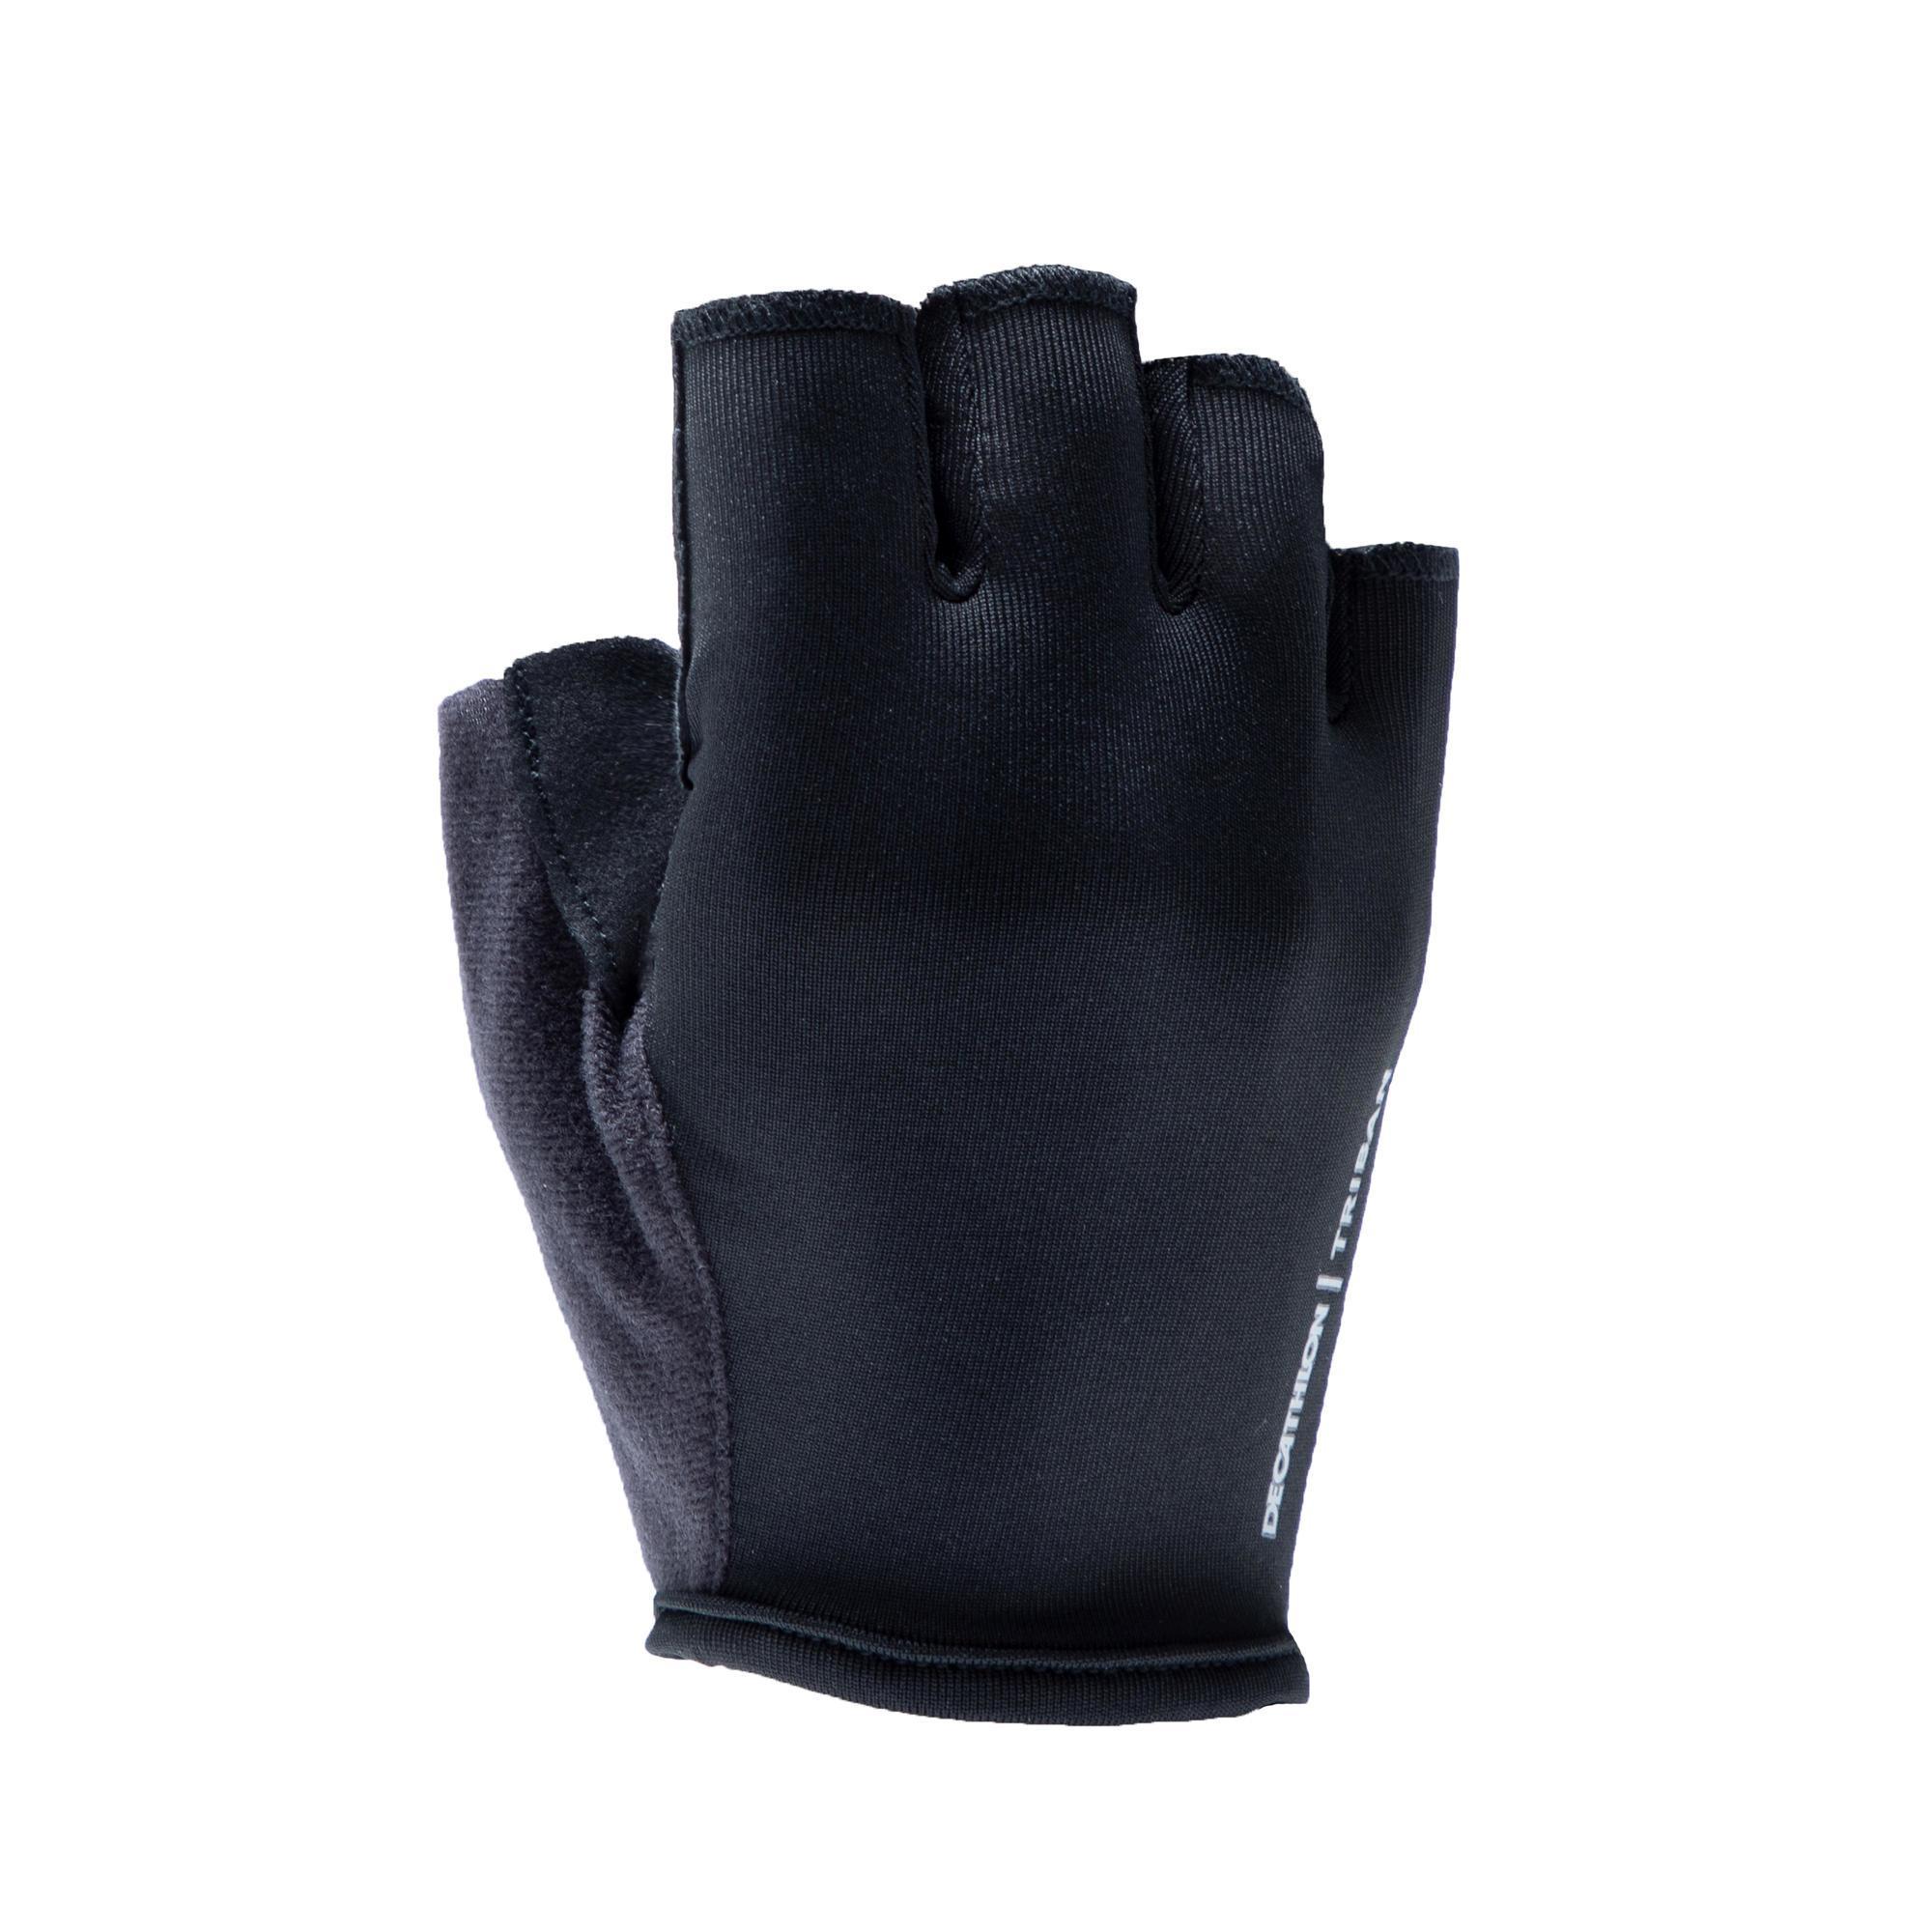 100 Road Cycling Touring Gloves Black 